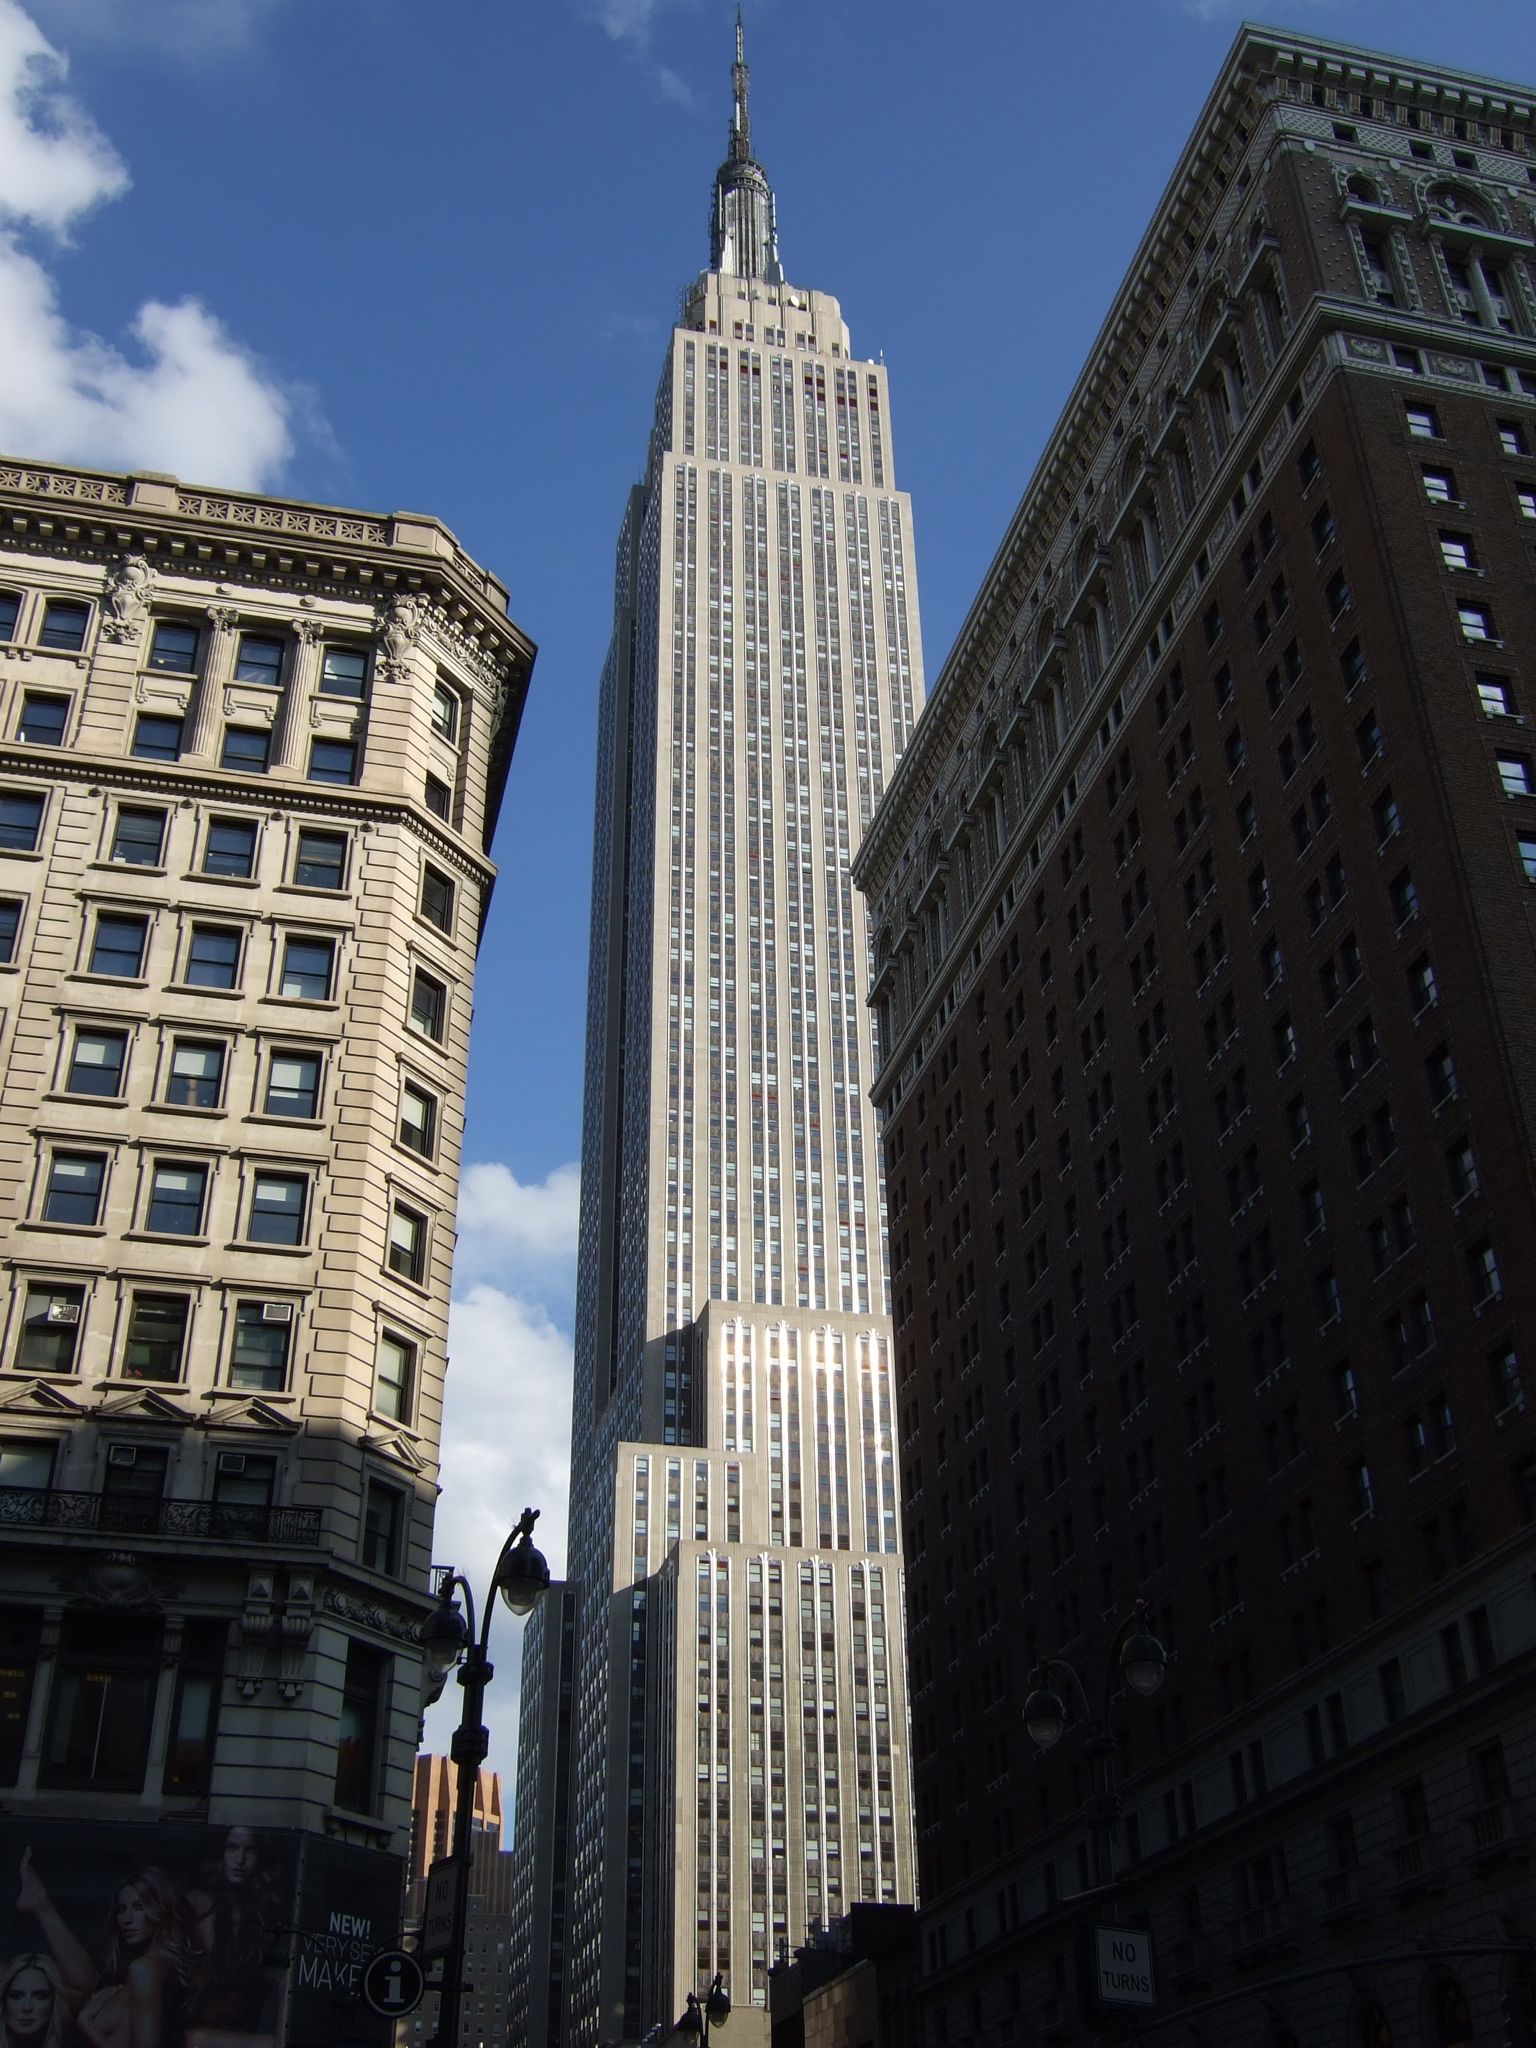 Photo 7 of 116 from the album Highlights New York 2006–2007.